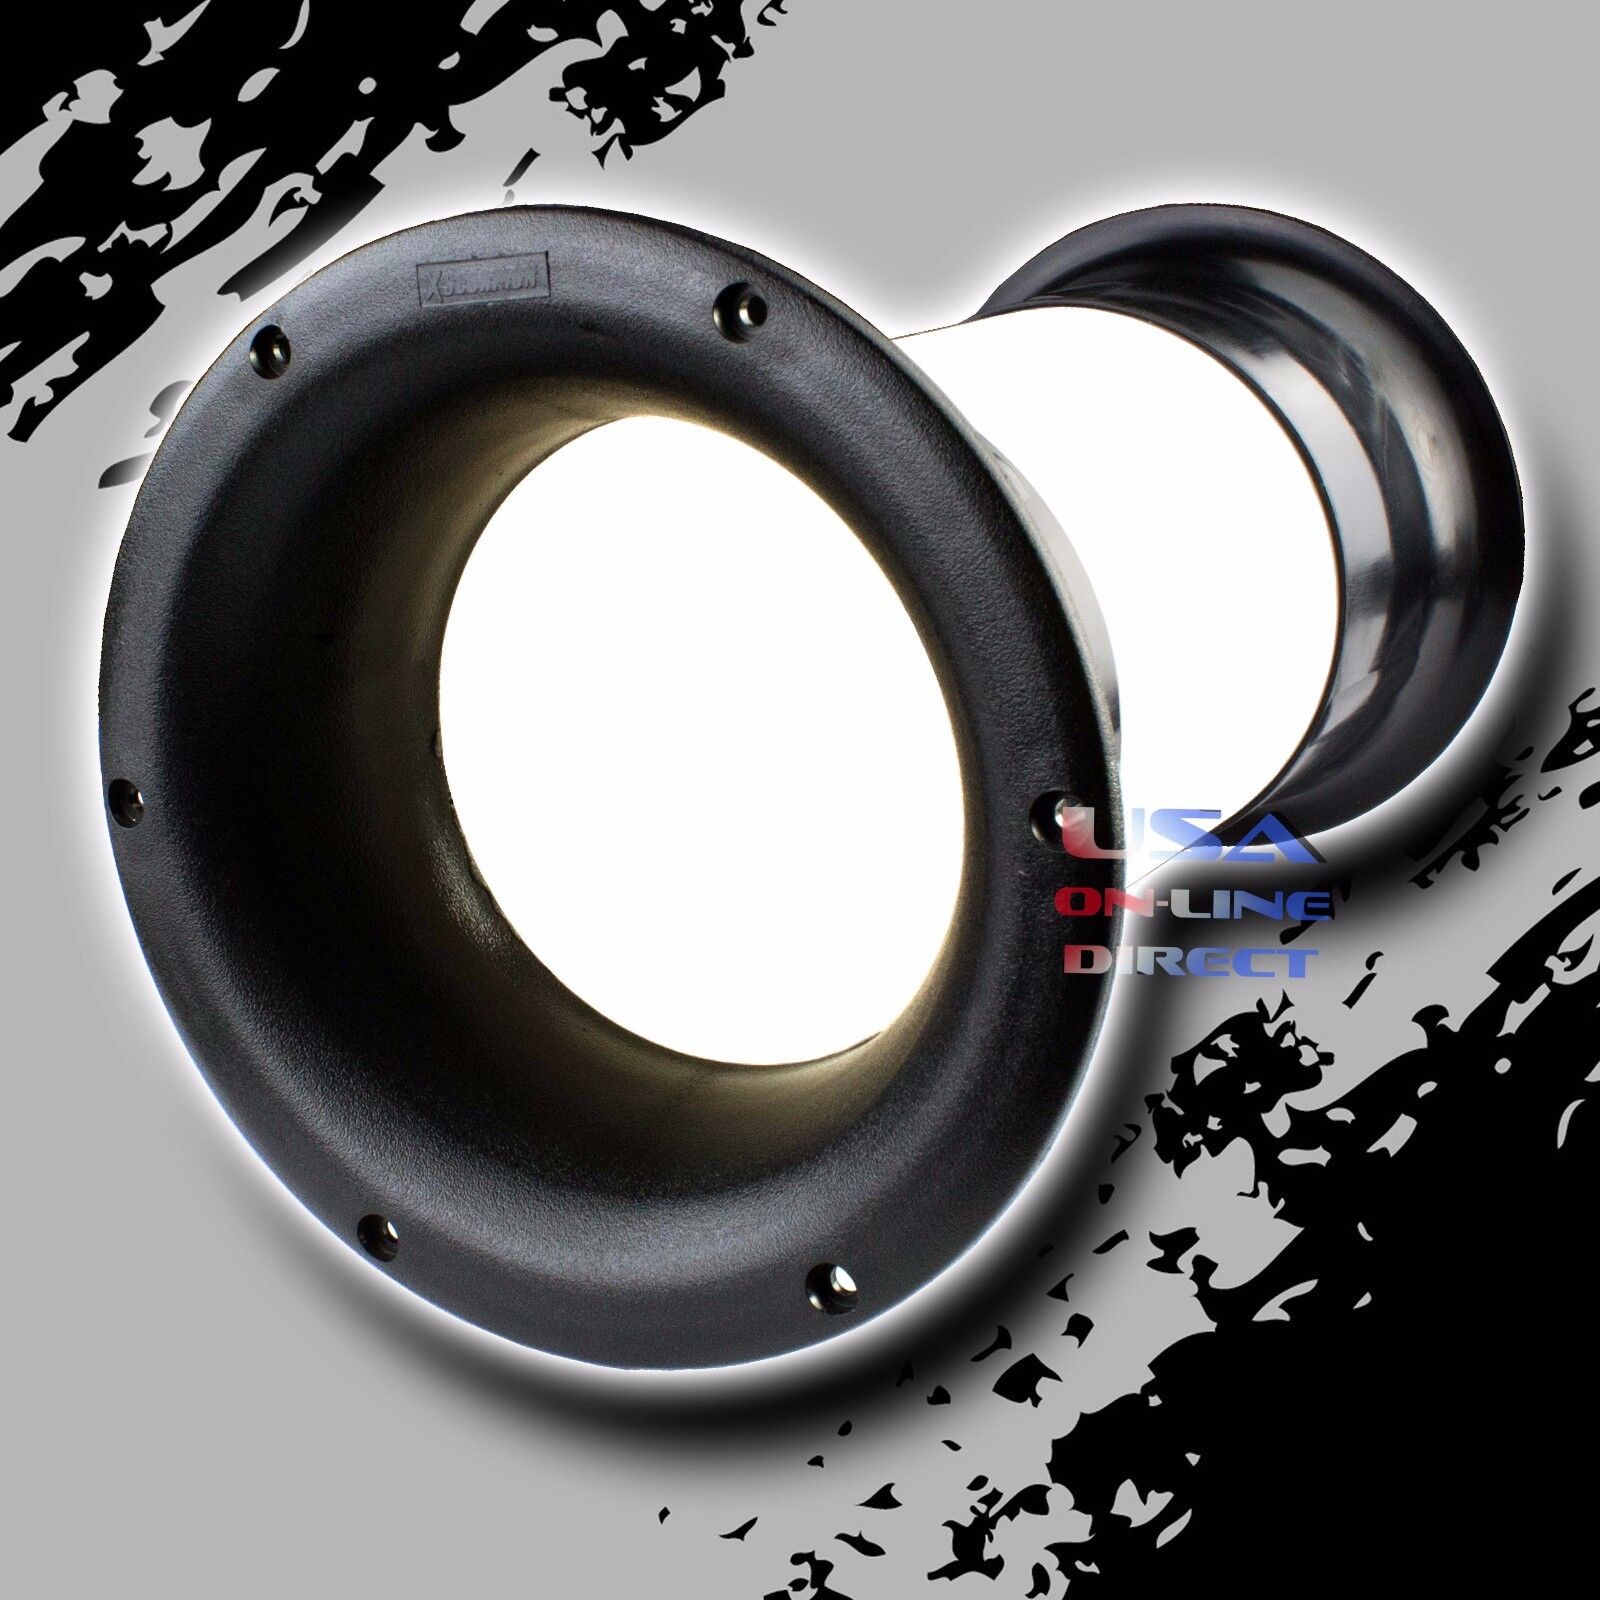 High Quality Molded 4" x 6" Aeroport for 10" to 18" Sub-woofer Bass Enclosure US